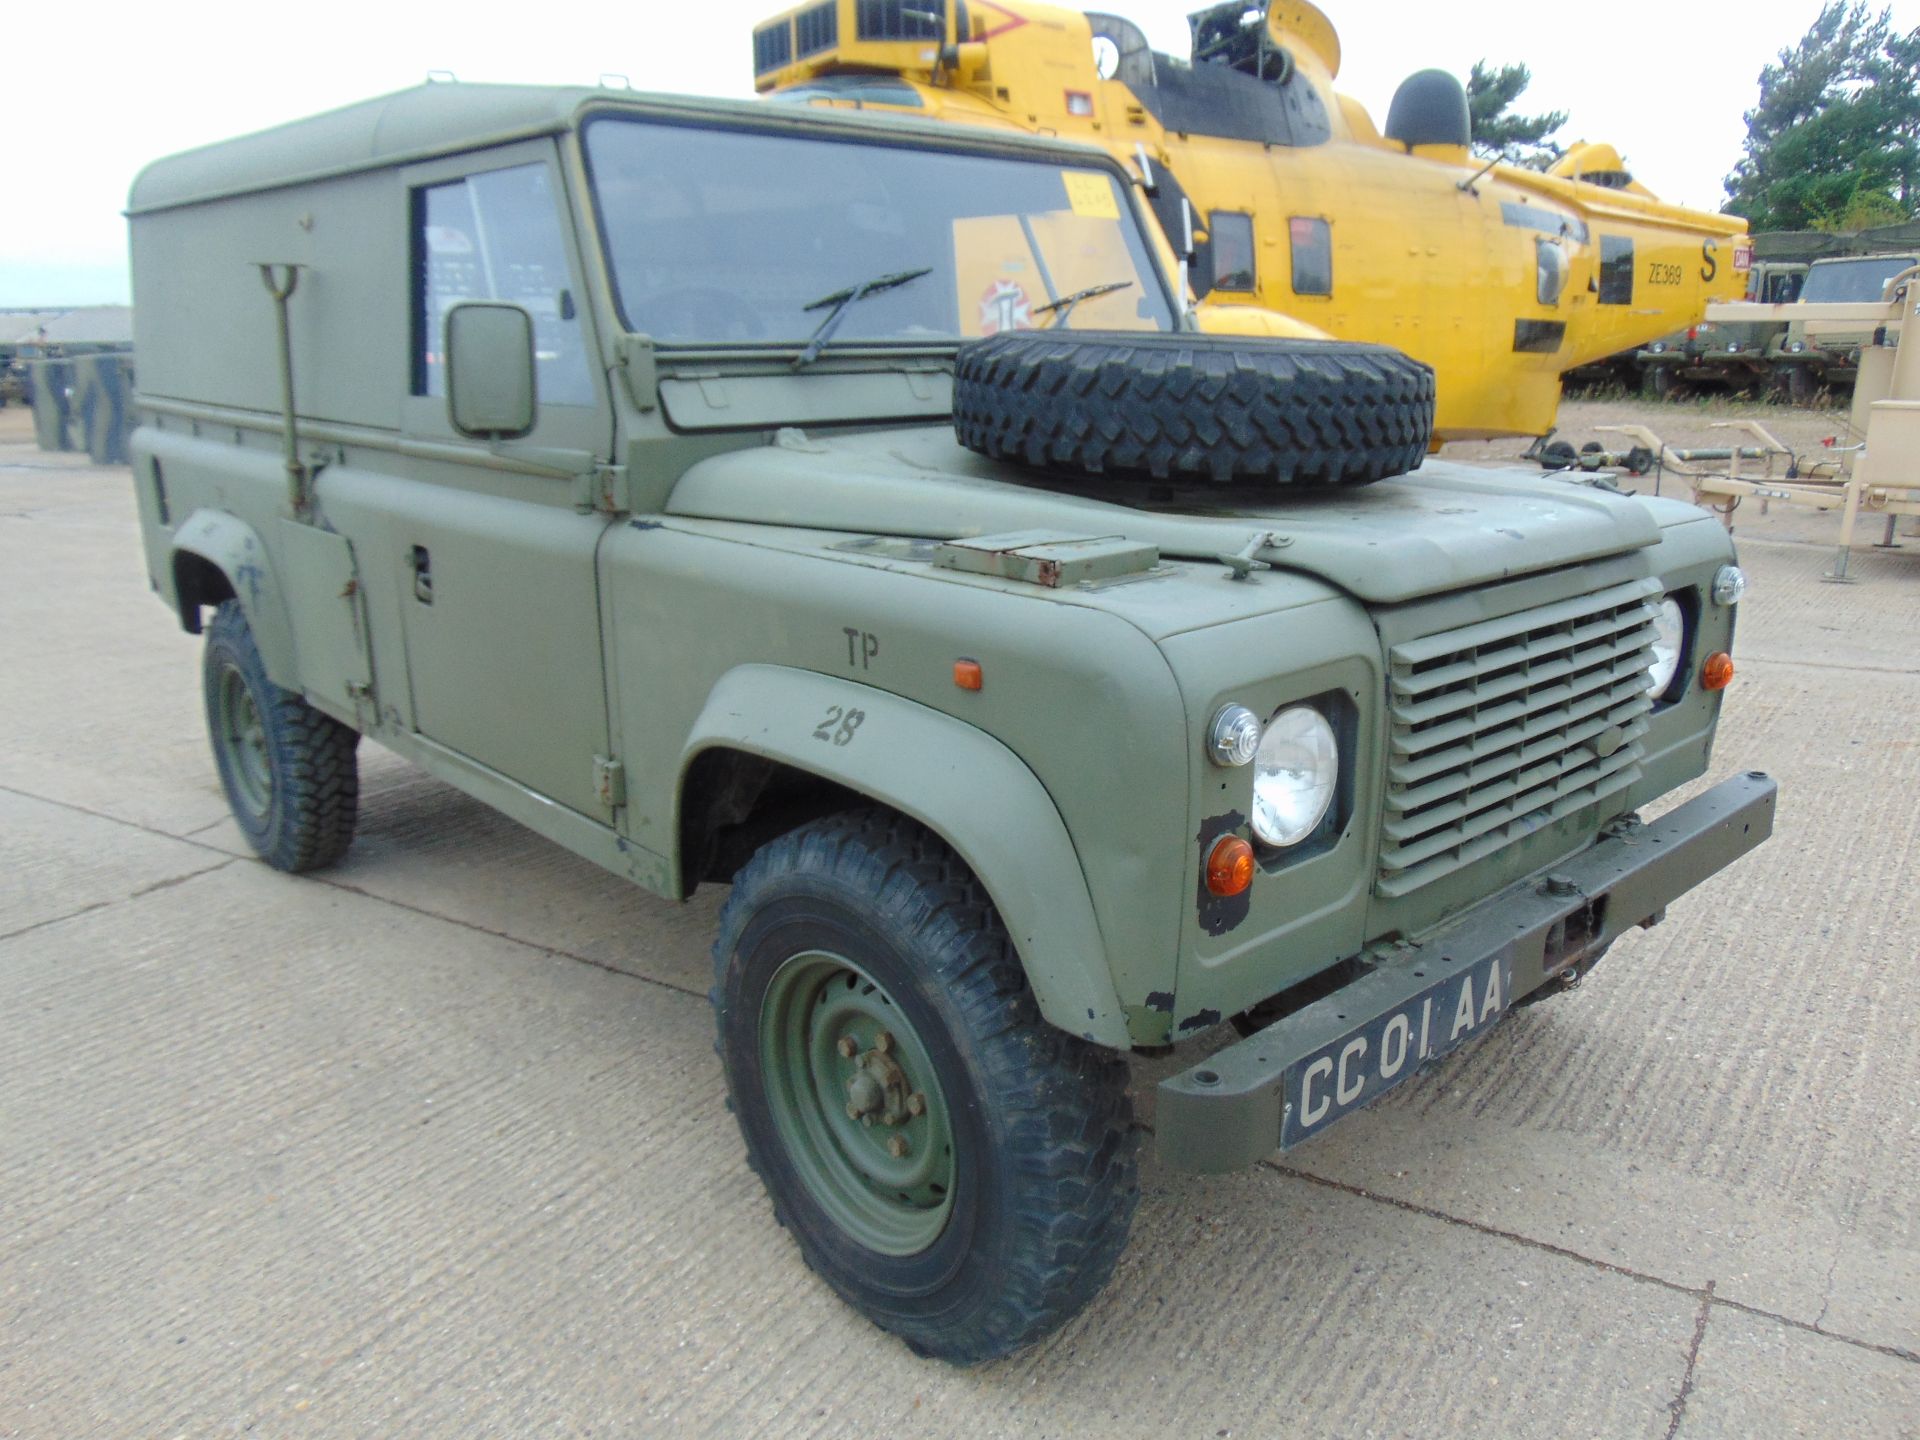 Land Rover Defender 110 Hard Top R380 Gearbox